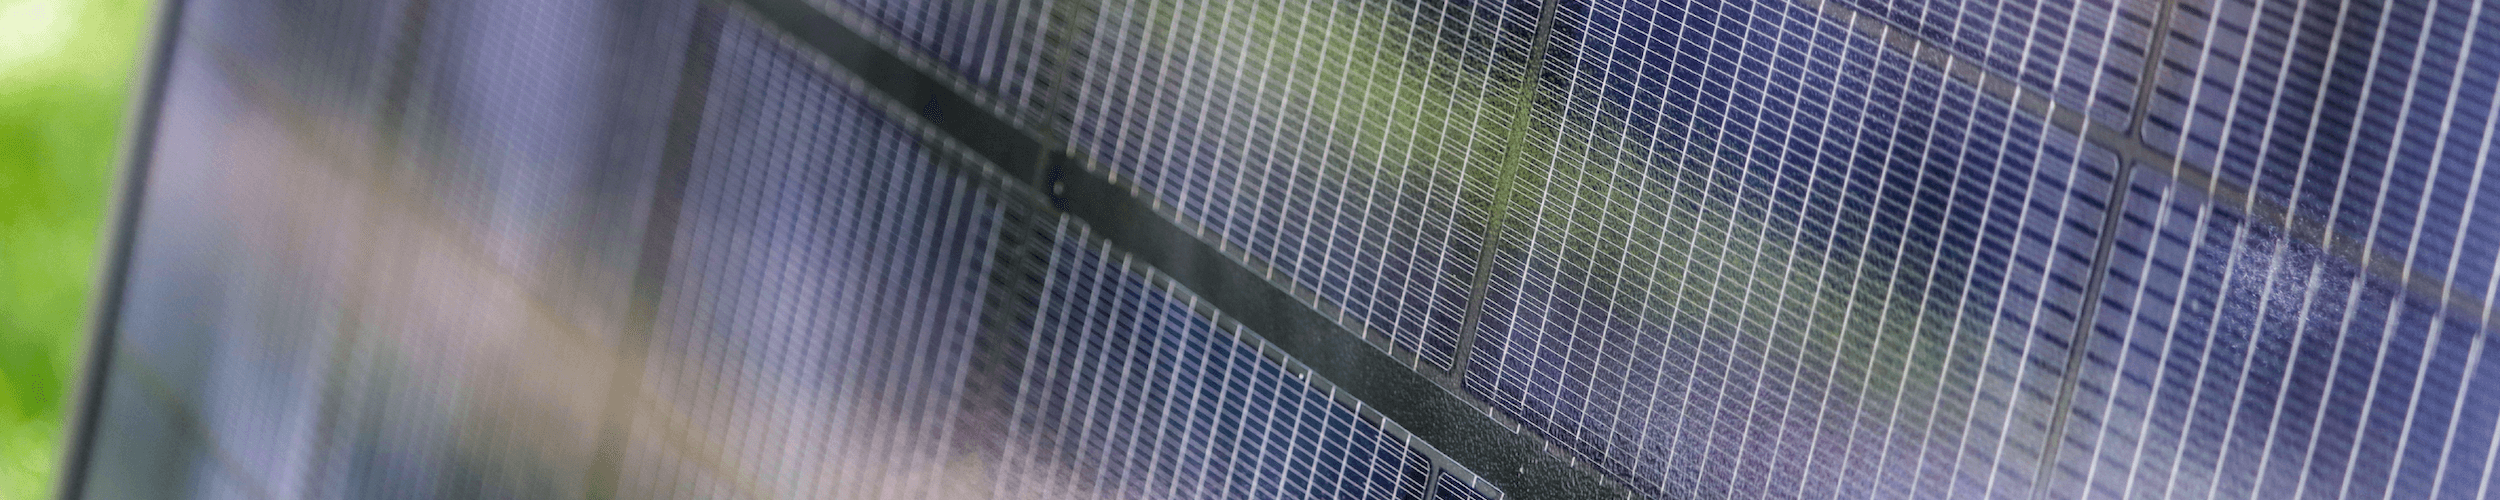 Up close shot of a solar panel, featuring individual solar cells